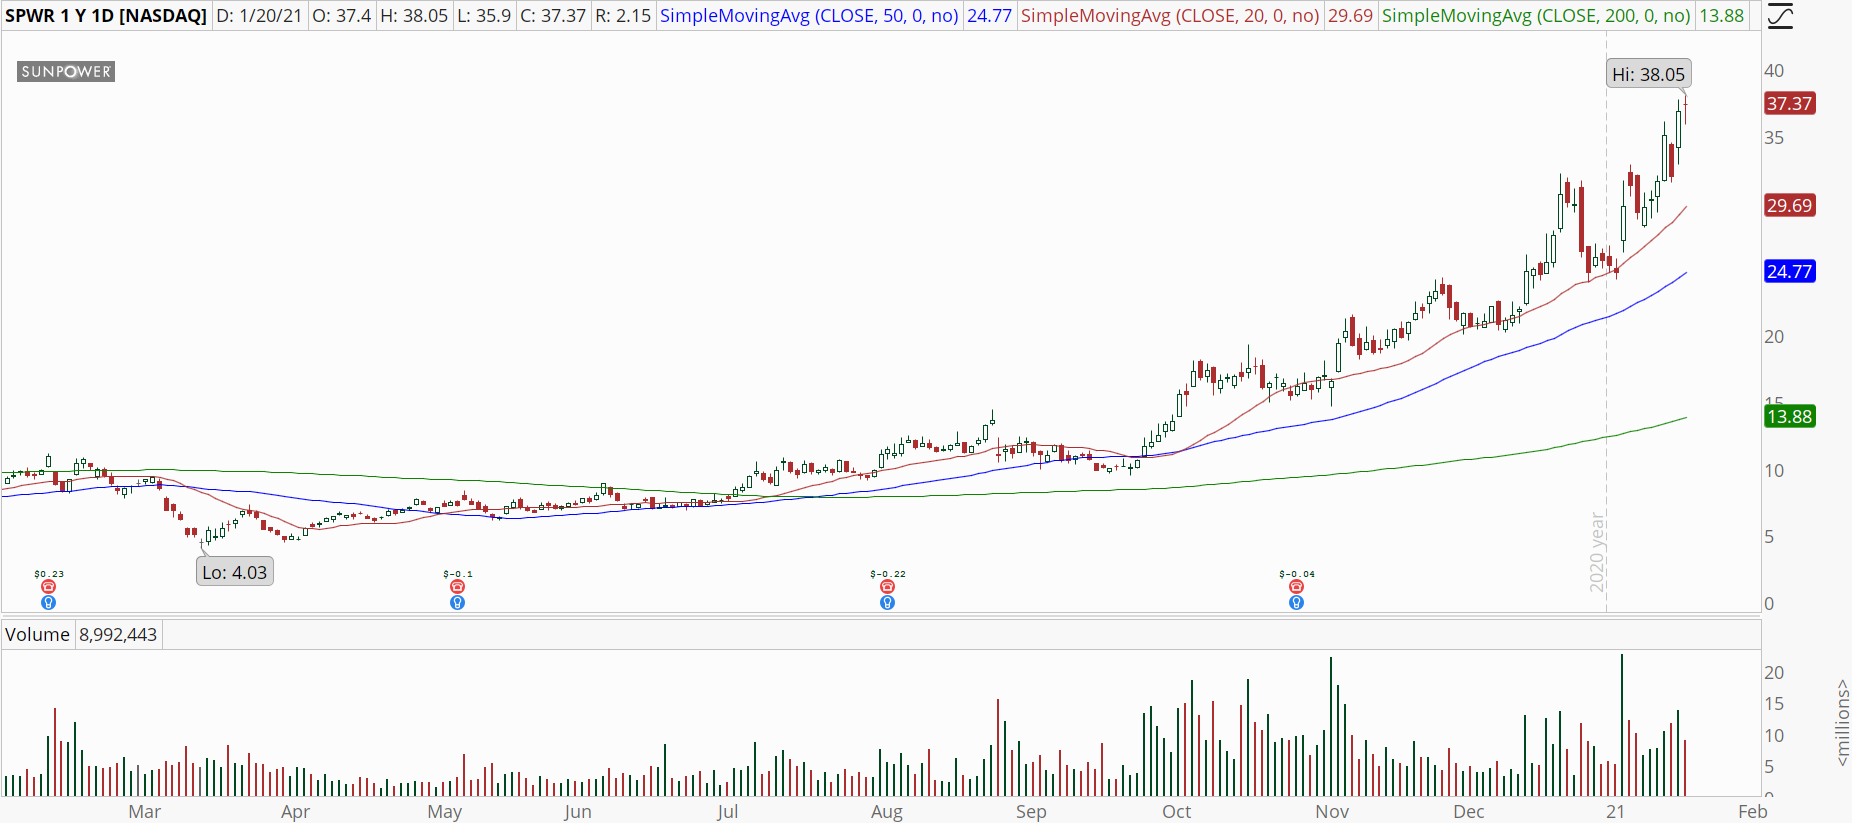 SunPower (SPWR) stock chart with powerful uptrend